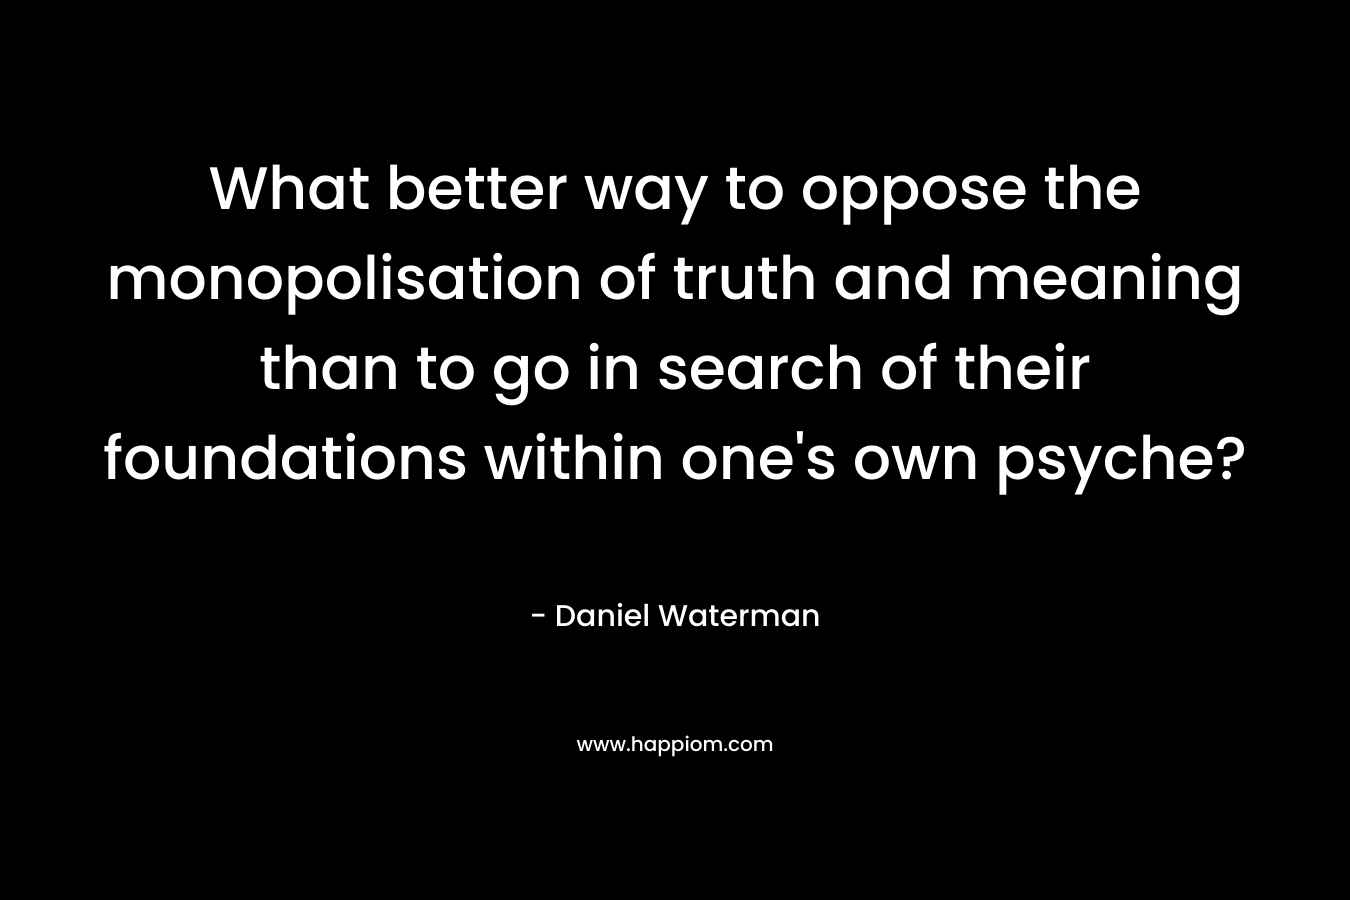 What better way to oppose the monopolisation of truth and meaning than to go in search of their foundations within one’s own psyche? – Daniel Waterman